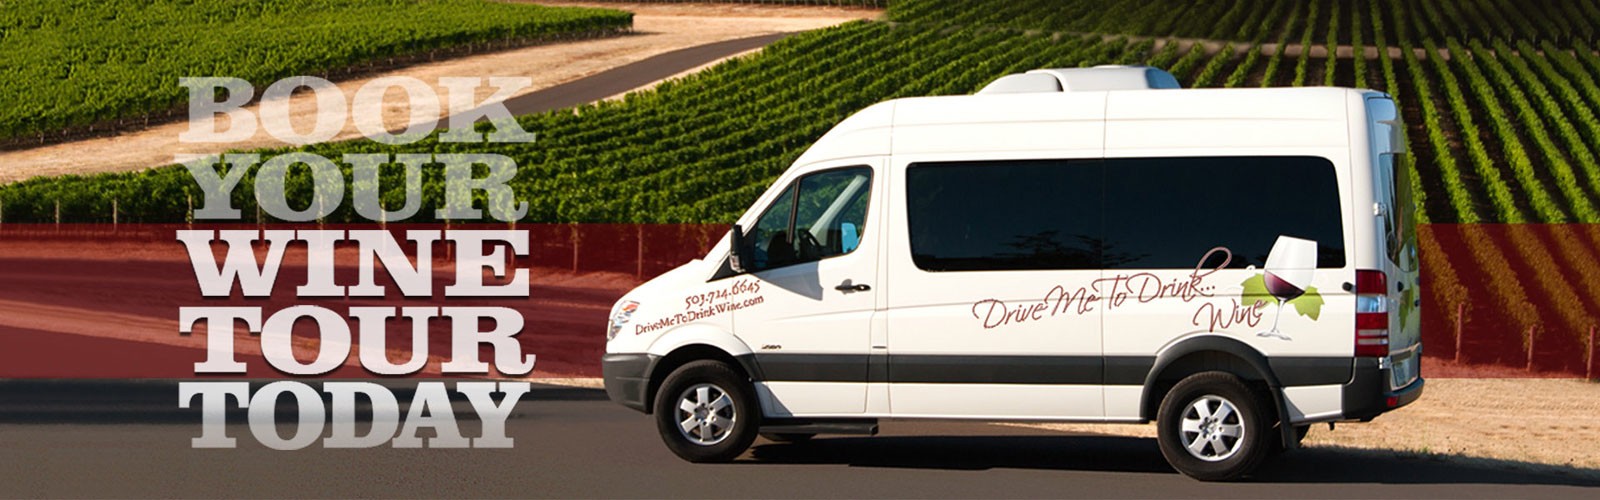 Drive Me to Drink Wine company group wine tour van: Mercedes luxury sprinter which seats a party of 2 to 11 passengers